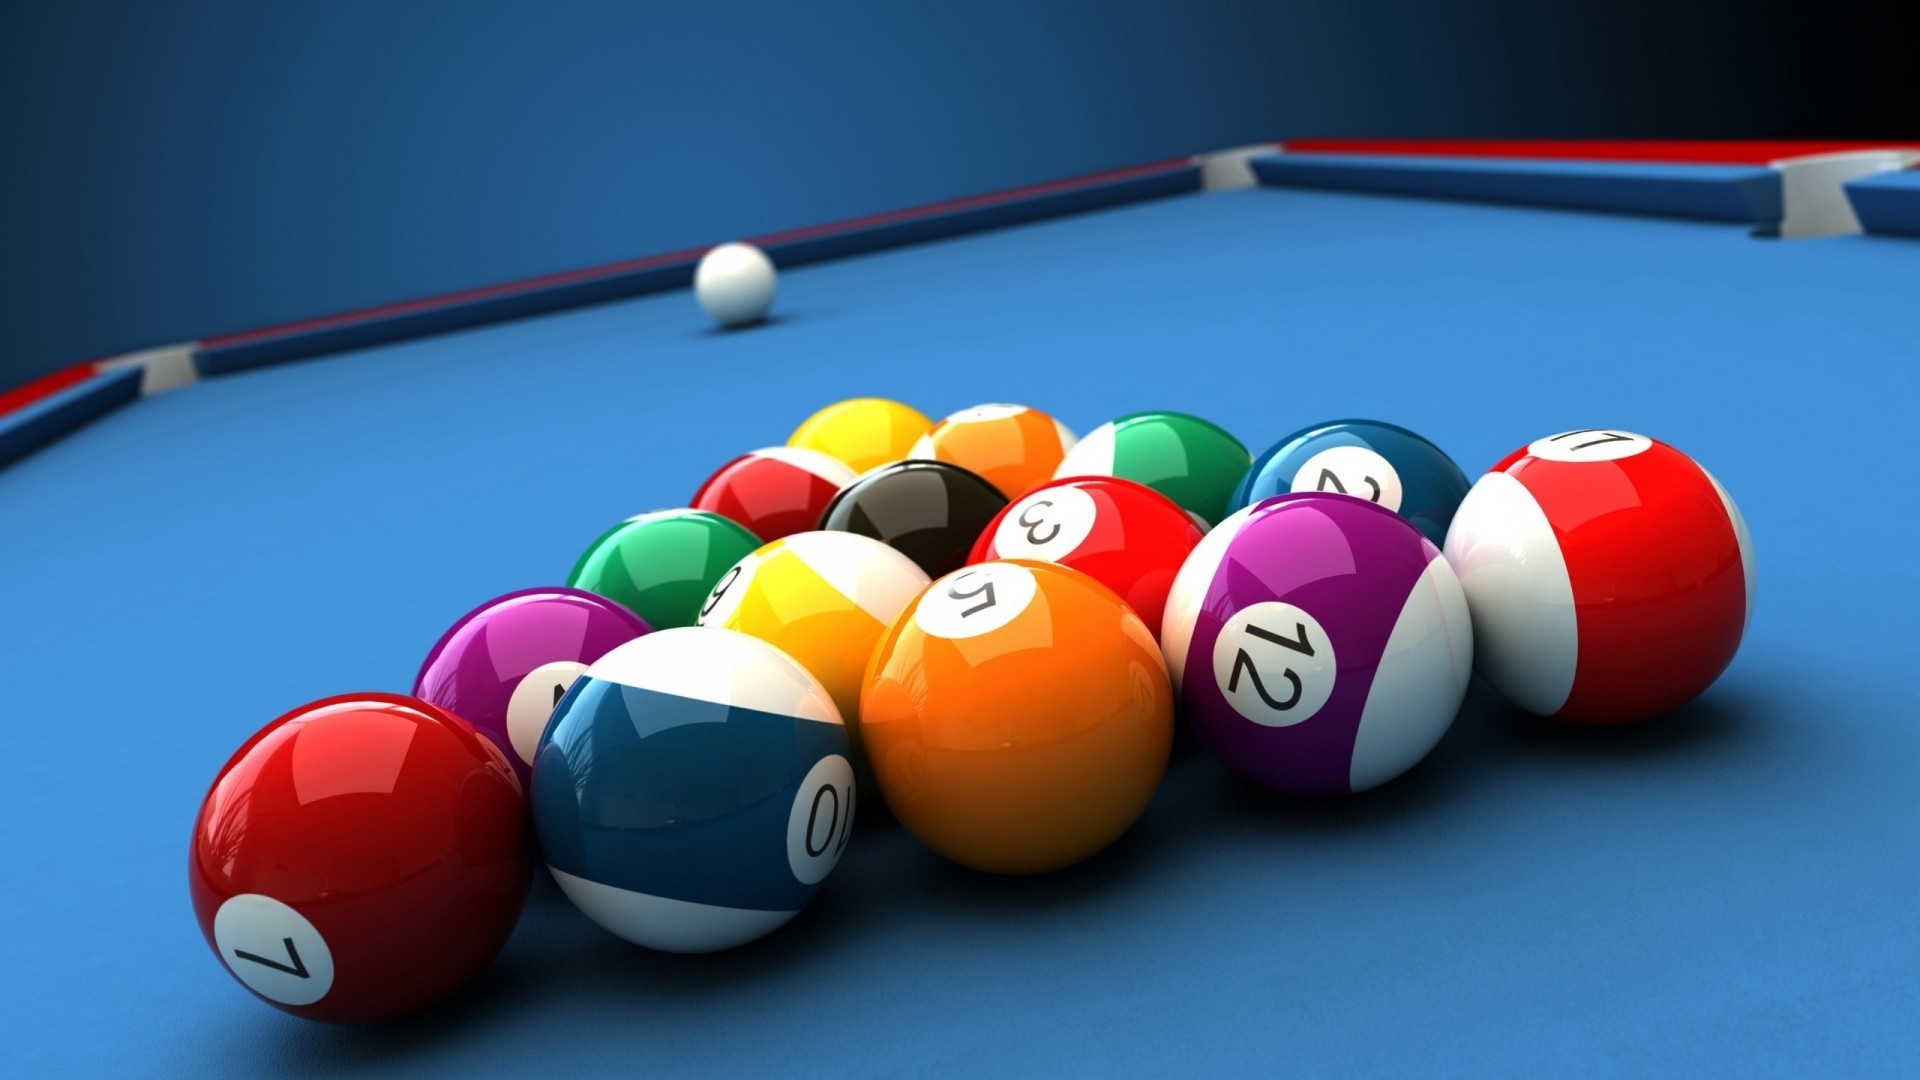 Use our 8 Ball Pool Hack Tool